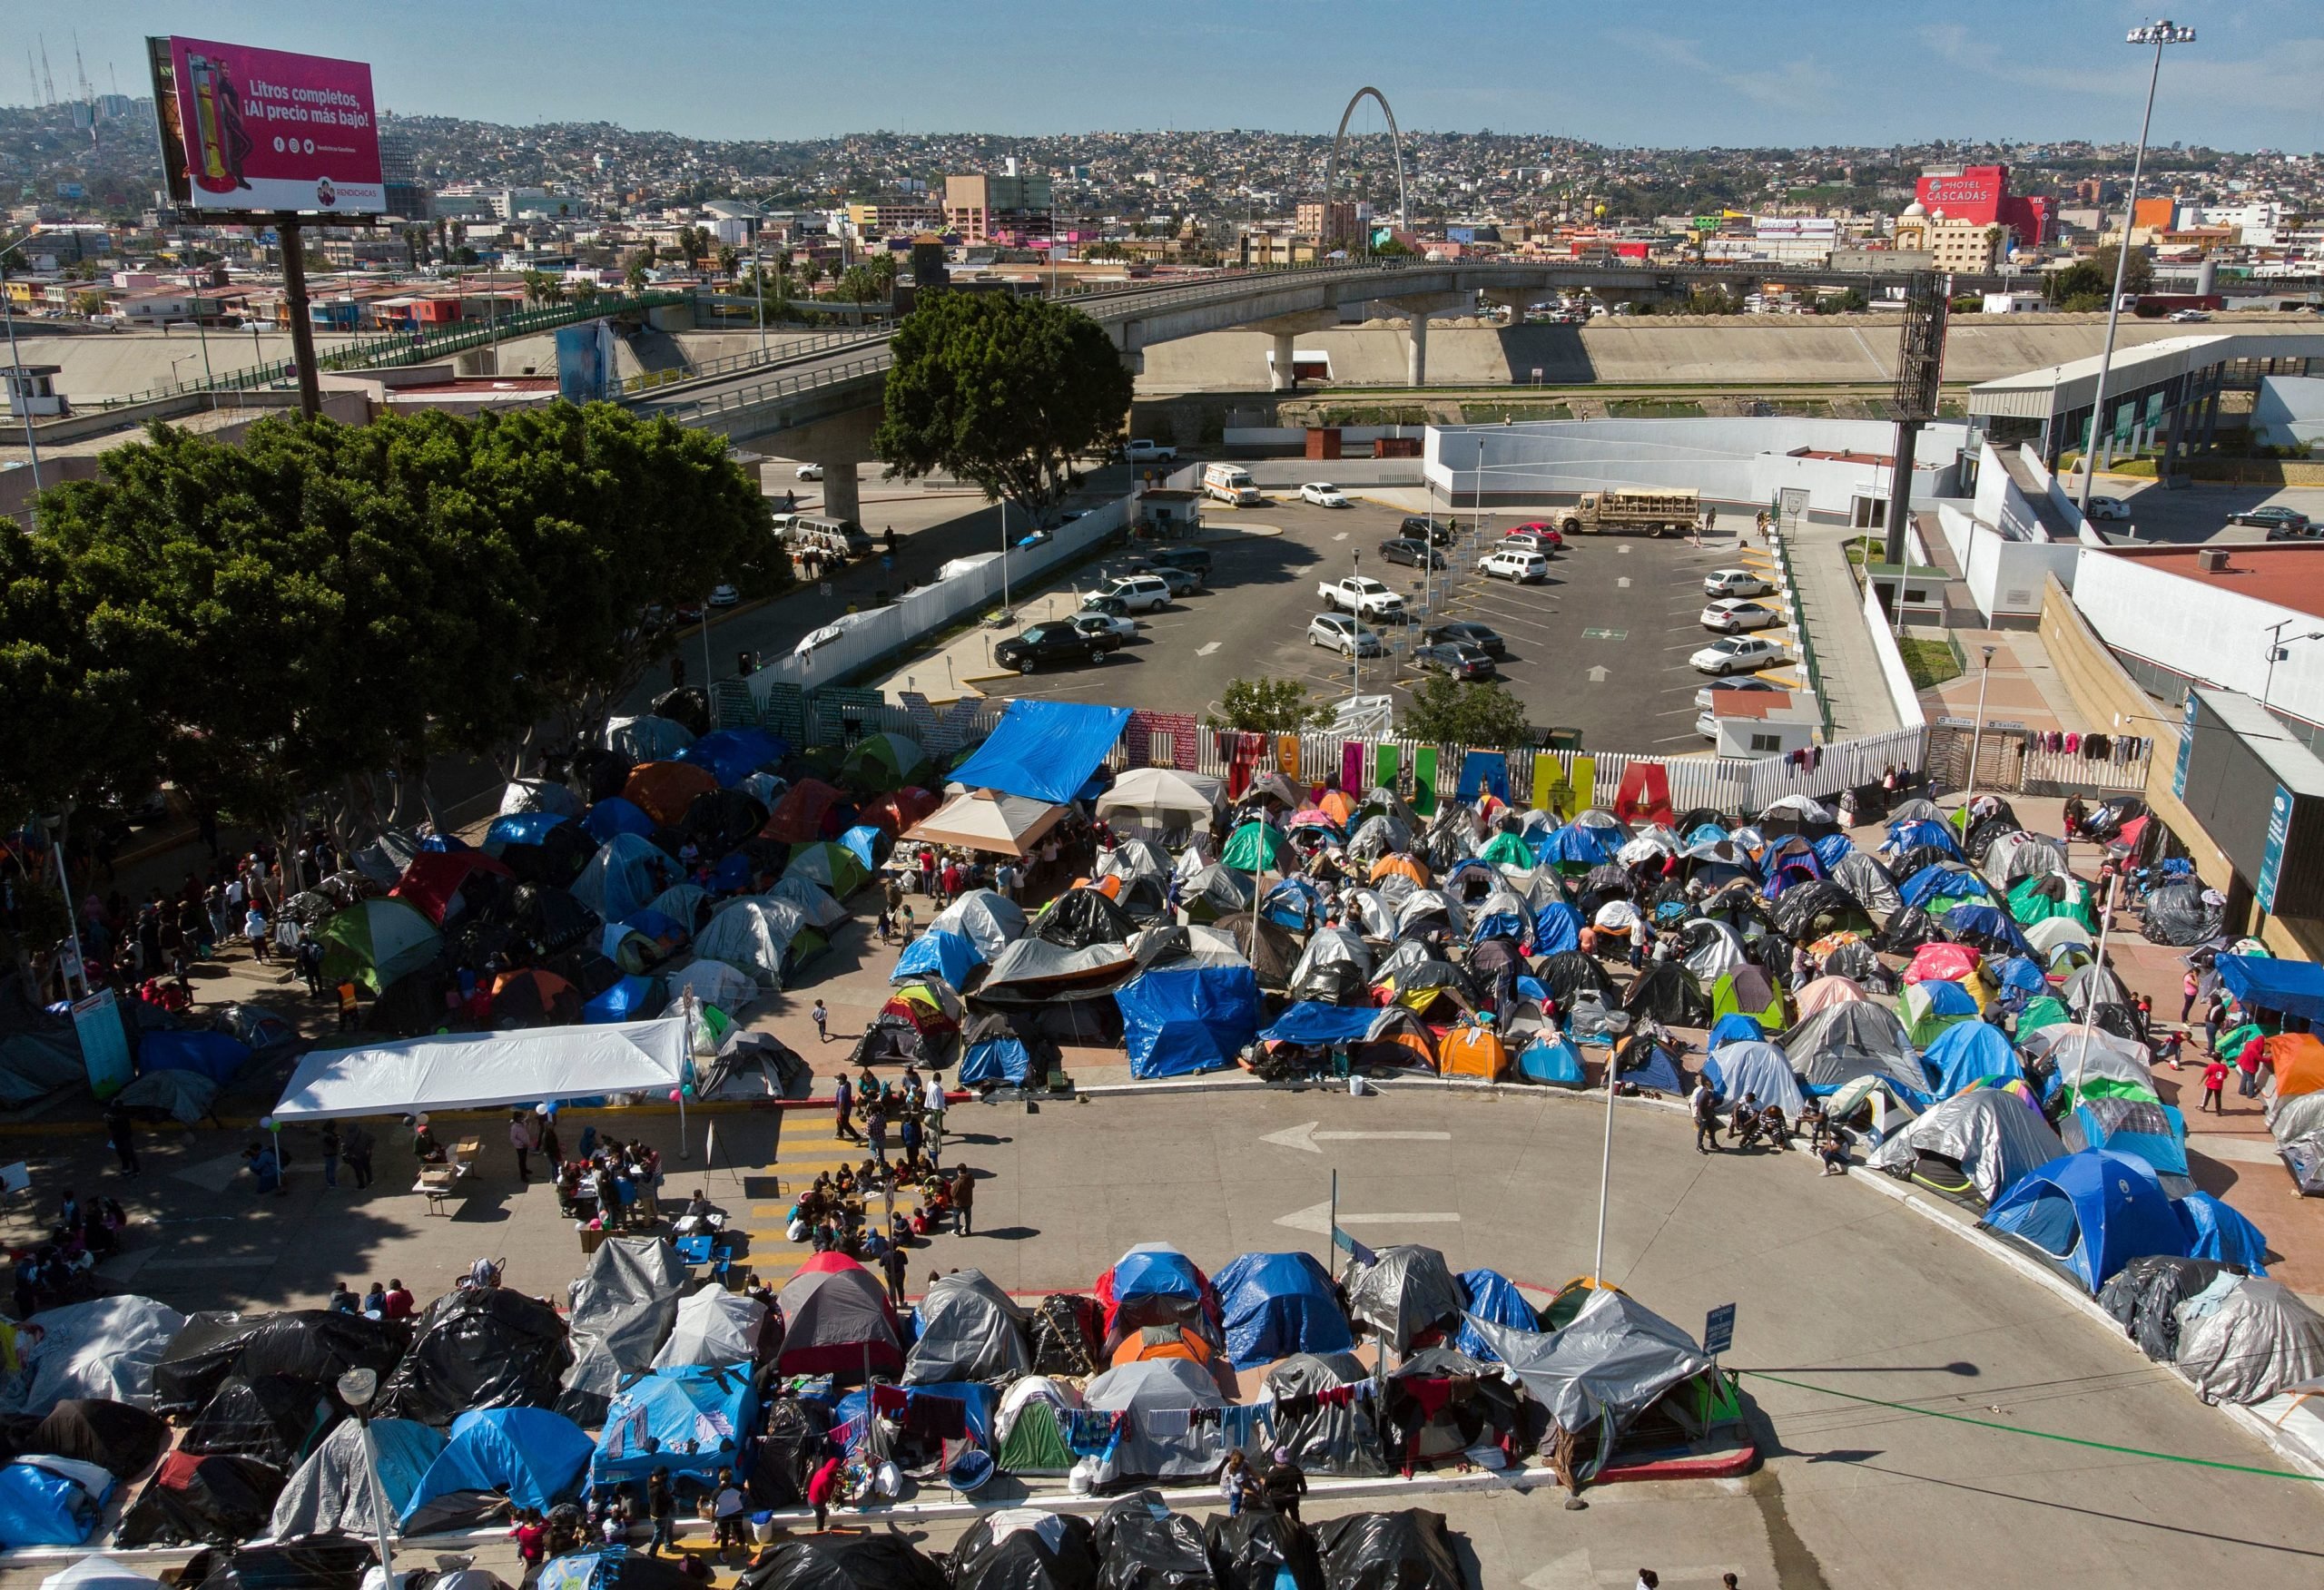 Aerial view of a migrants camp where asylum seekers wait for US authorities to allow them to start their migration process outside El Chaparral crossing port in Tijuana, Baja California state, Mexico on March 17, 2021. (Photo by GUILLERMO ARIAS/AFP via Getty Images)